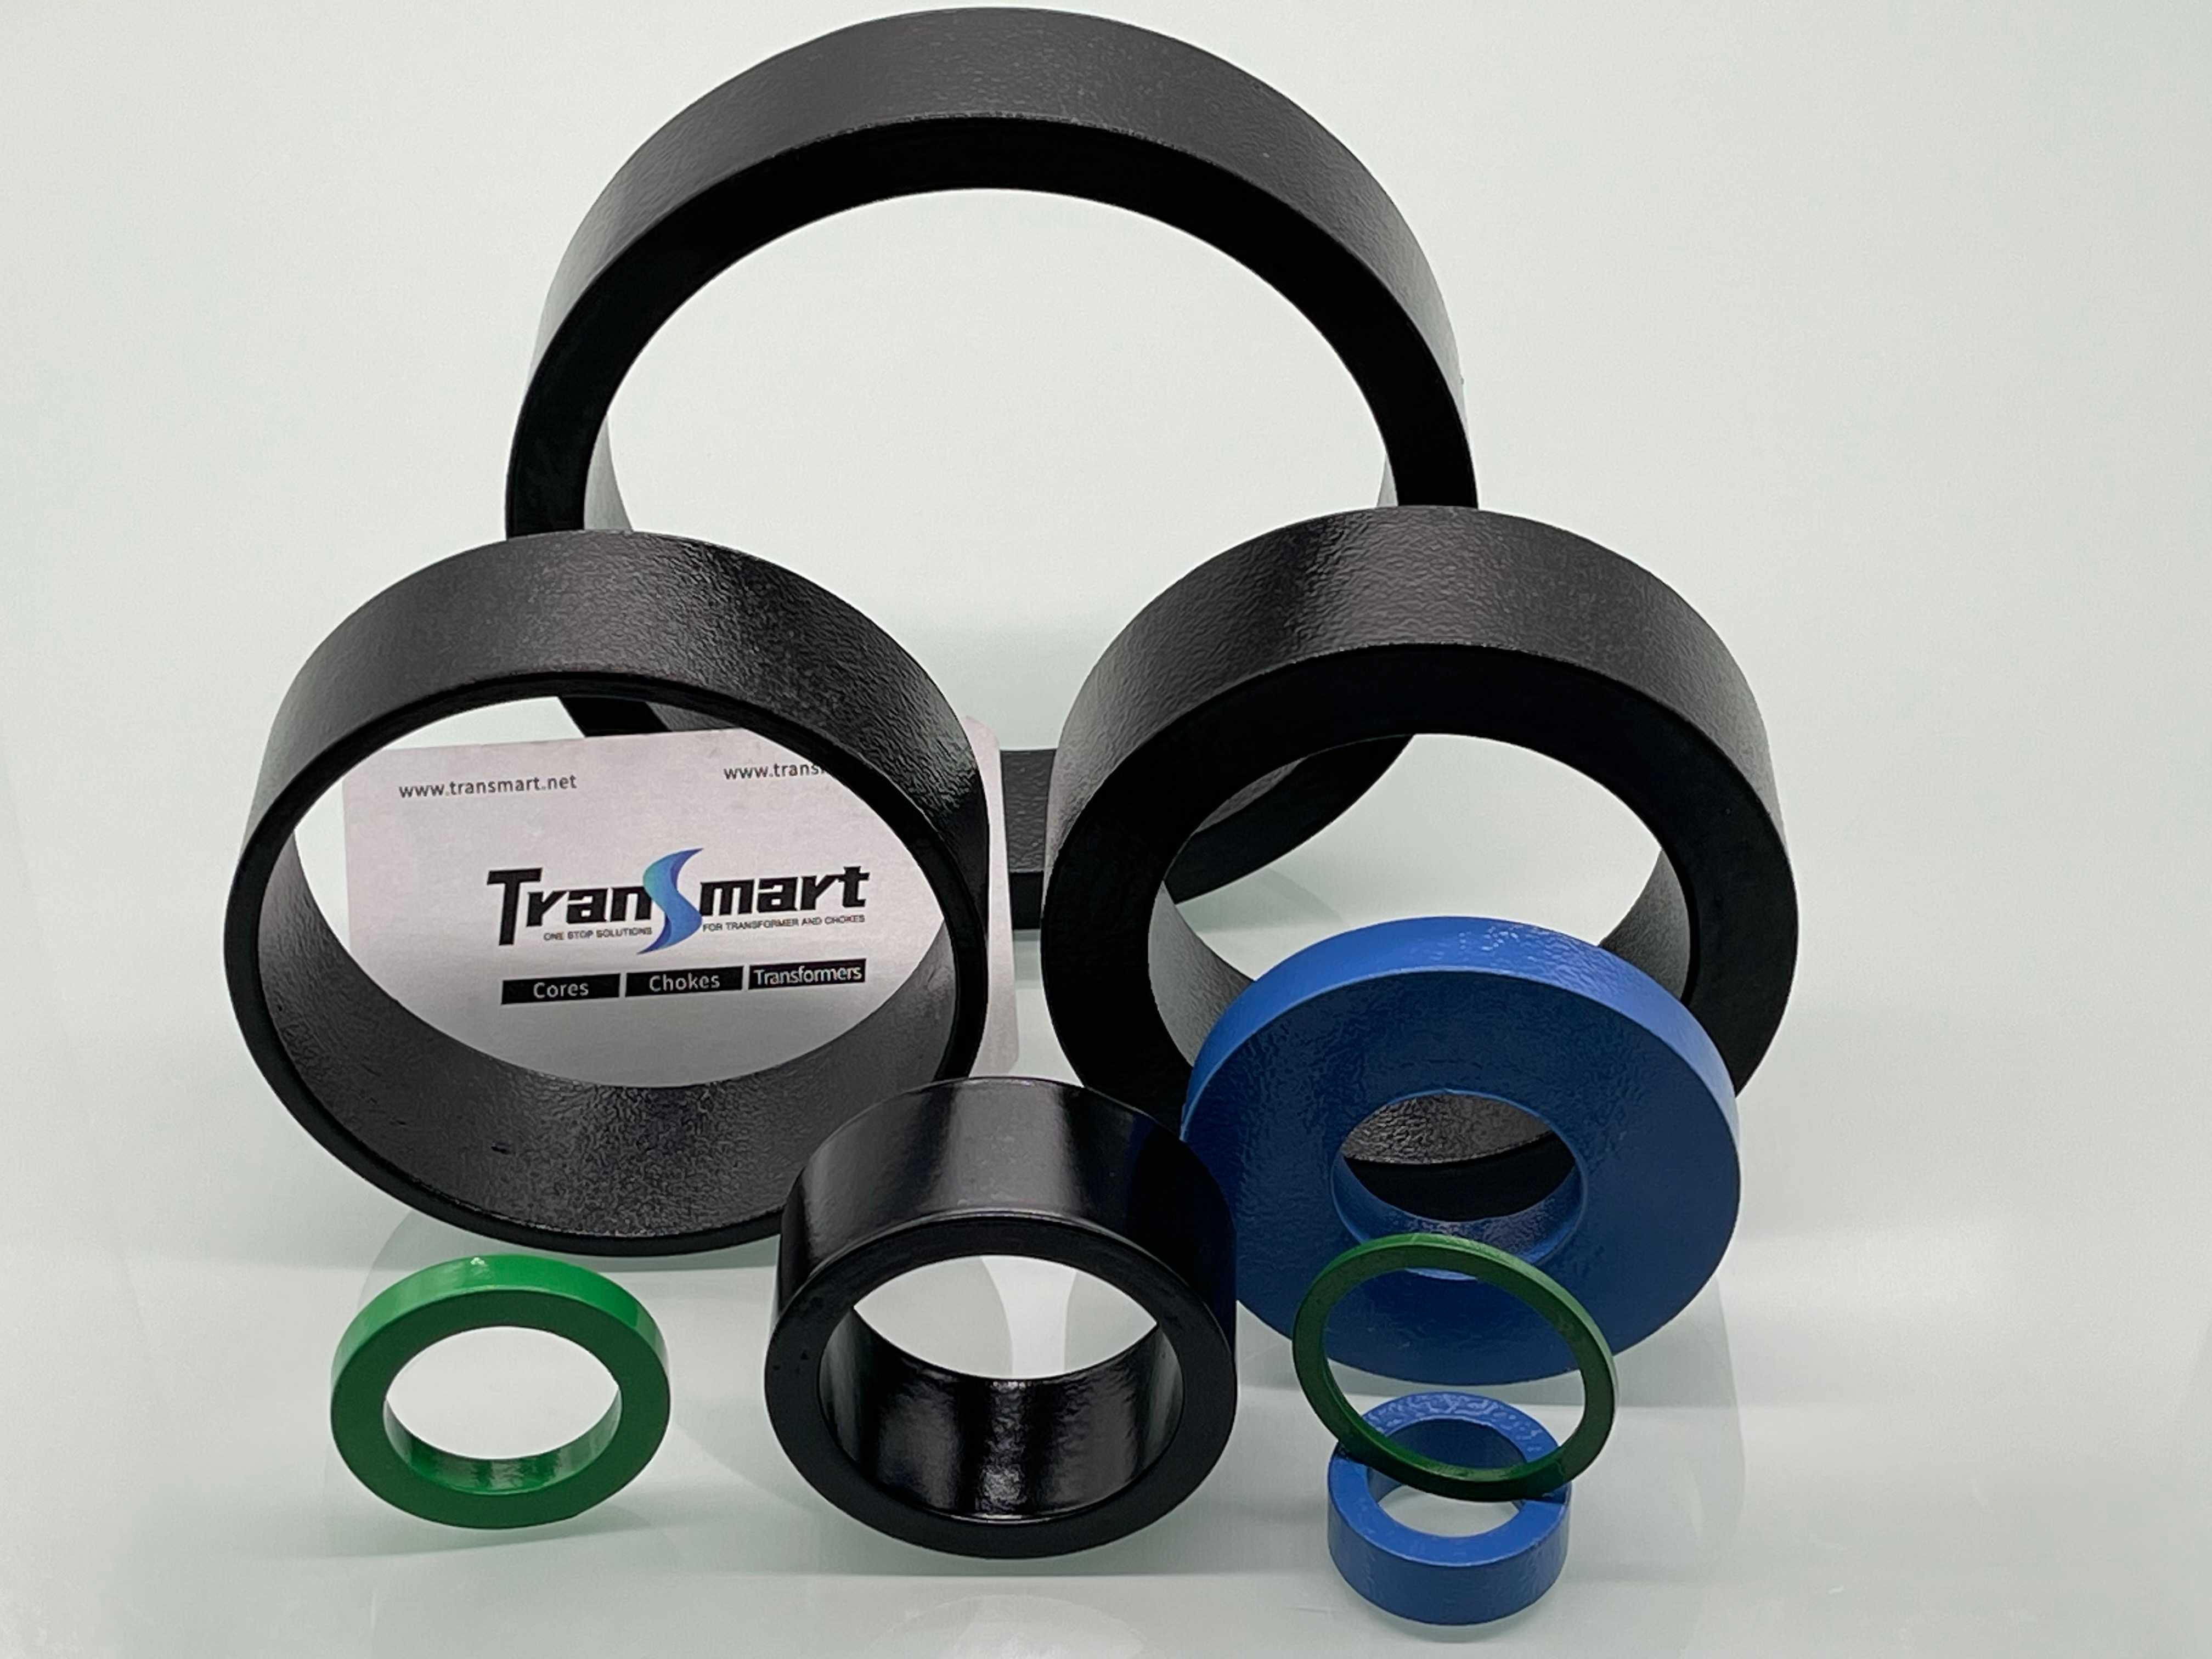 Choosing the Right Core: Exploring Different Types of Current Transformer Cores